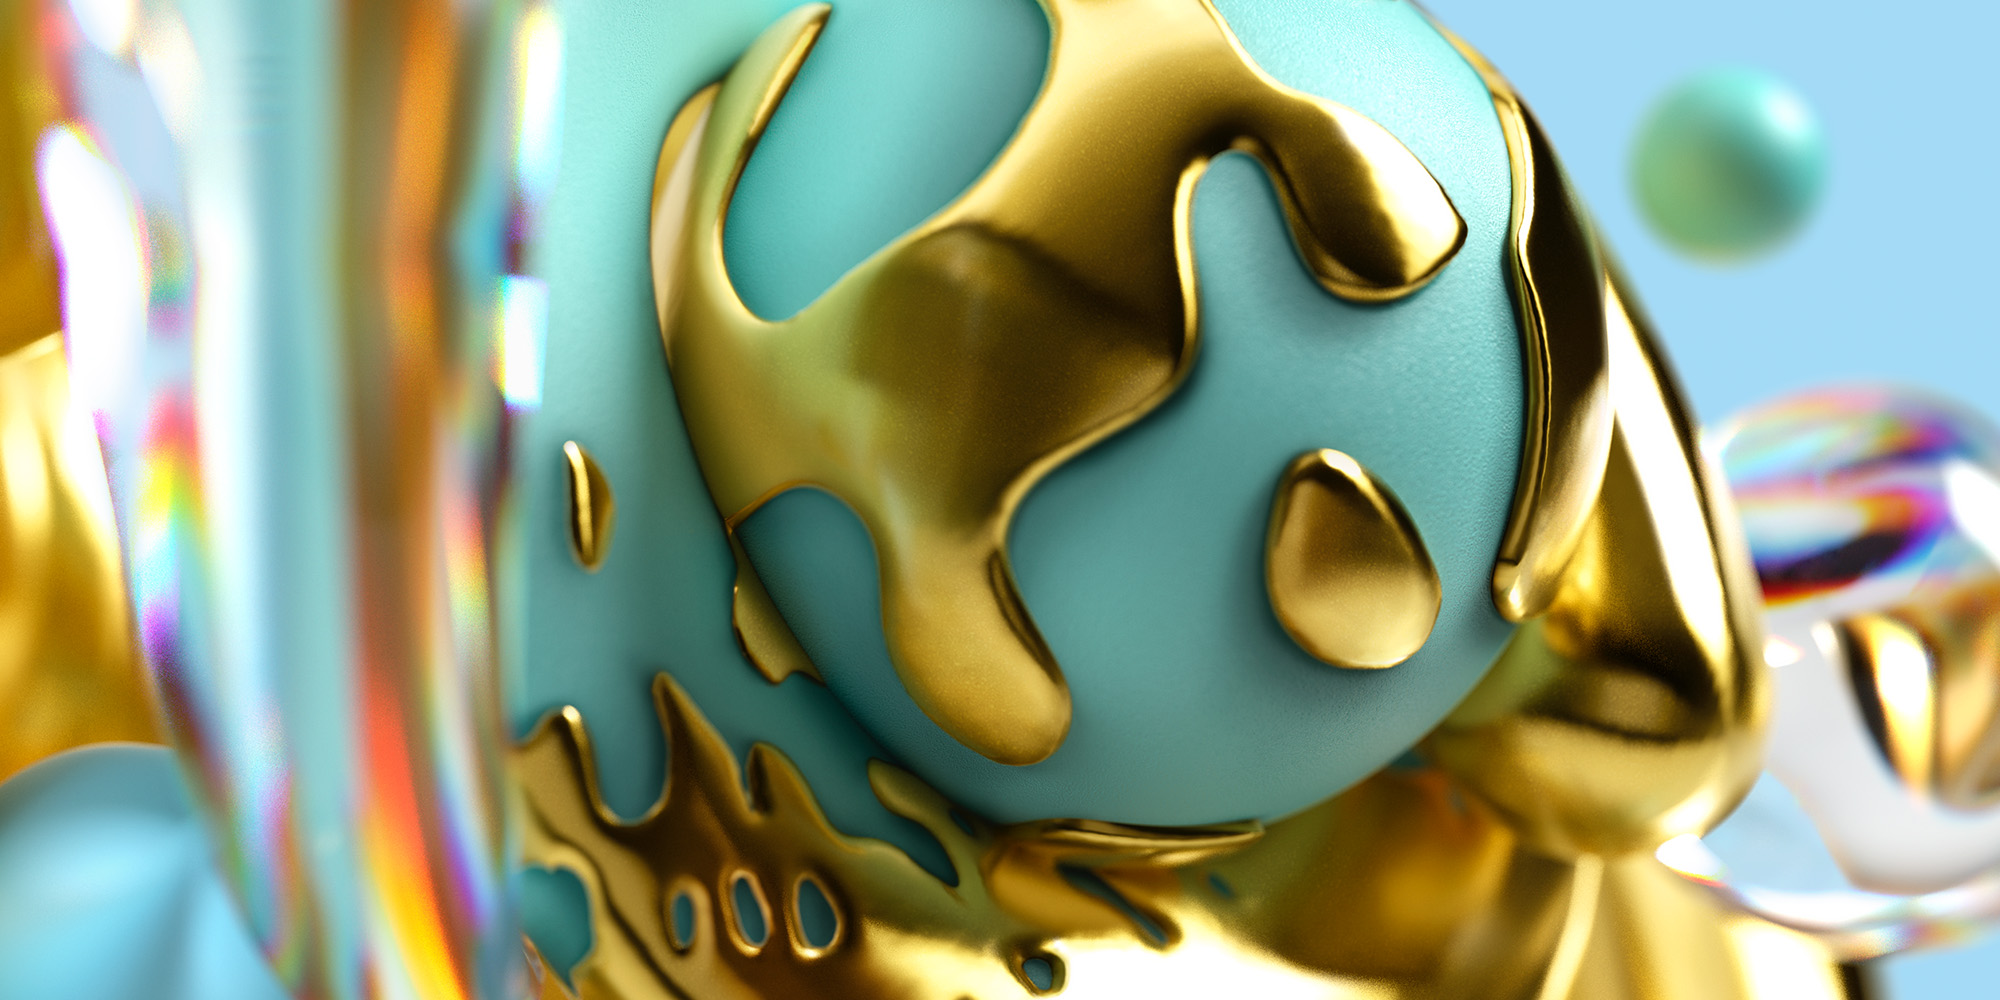 7 trends to watch at Cannes Lions gold on teal ball image